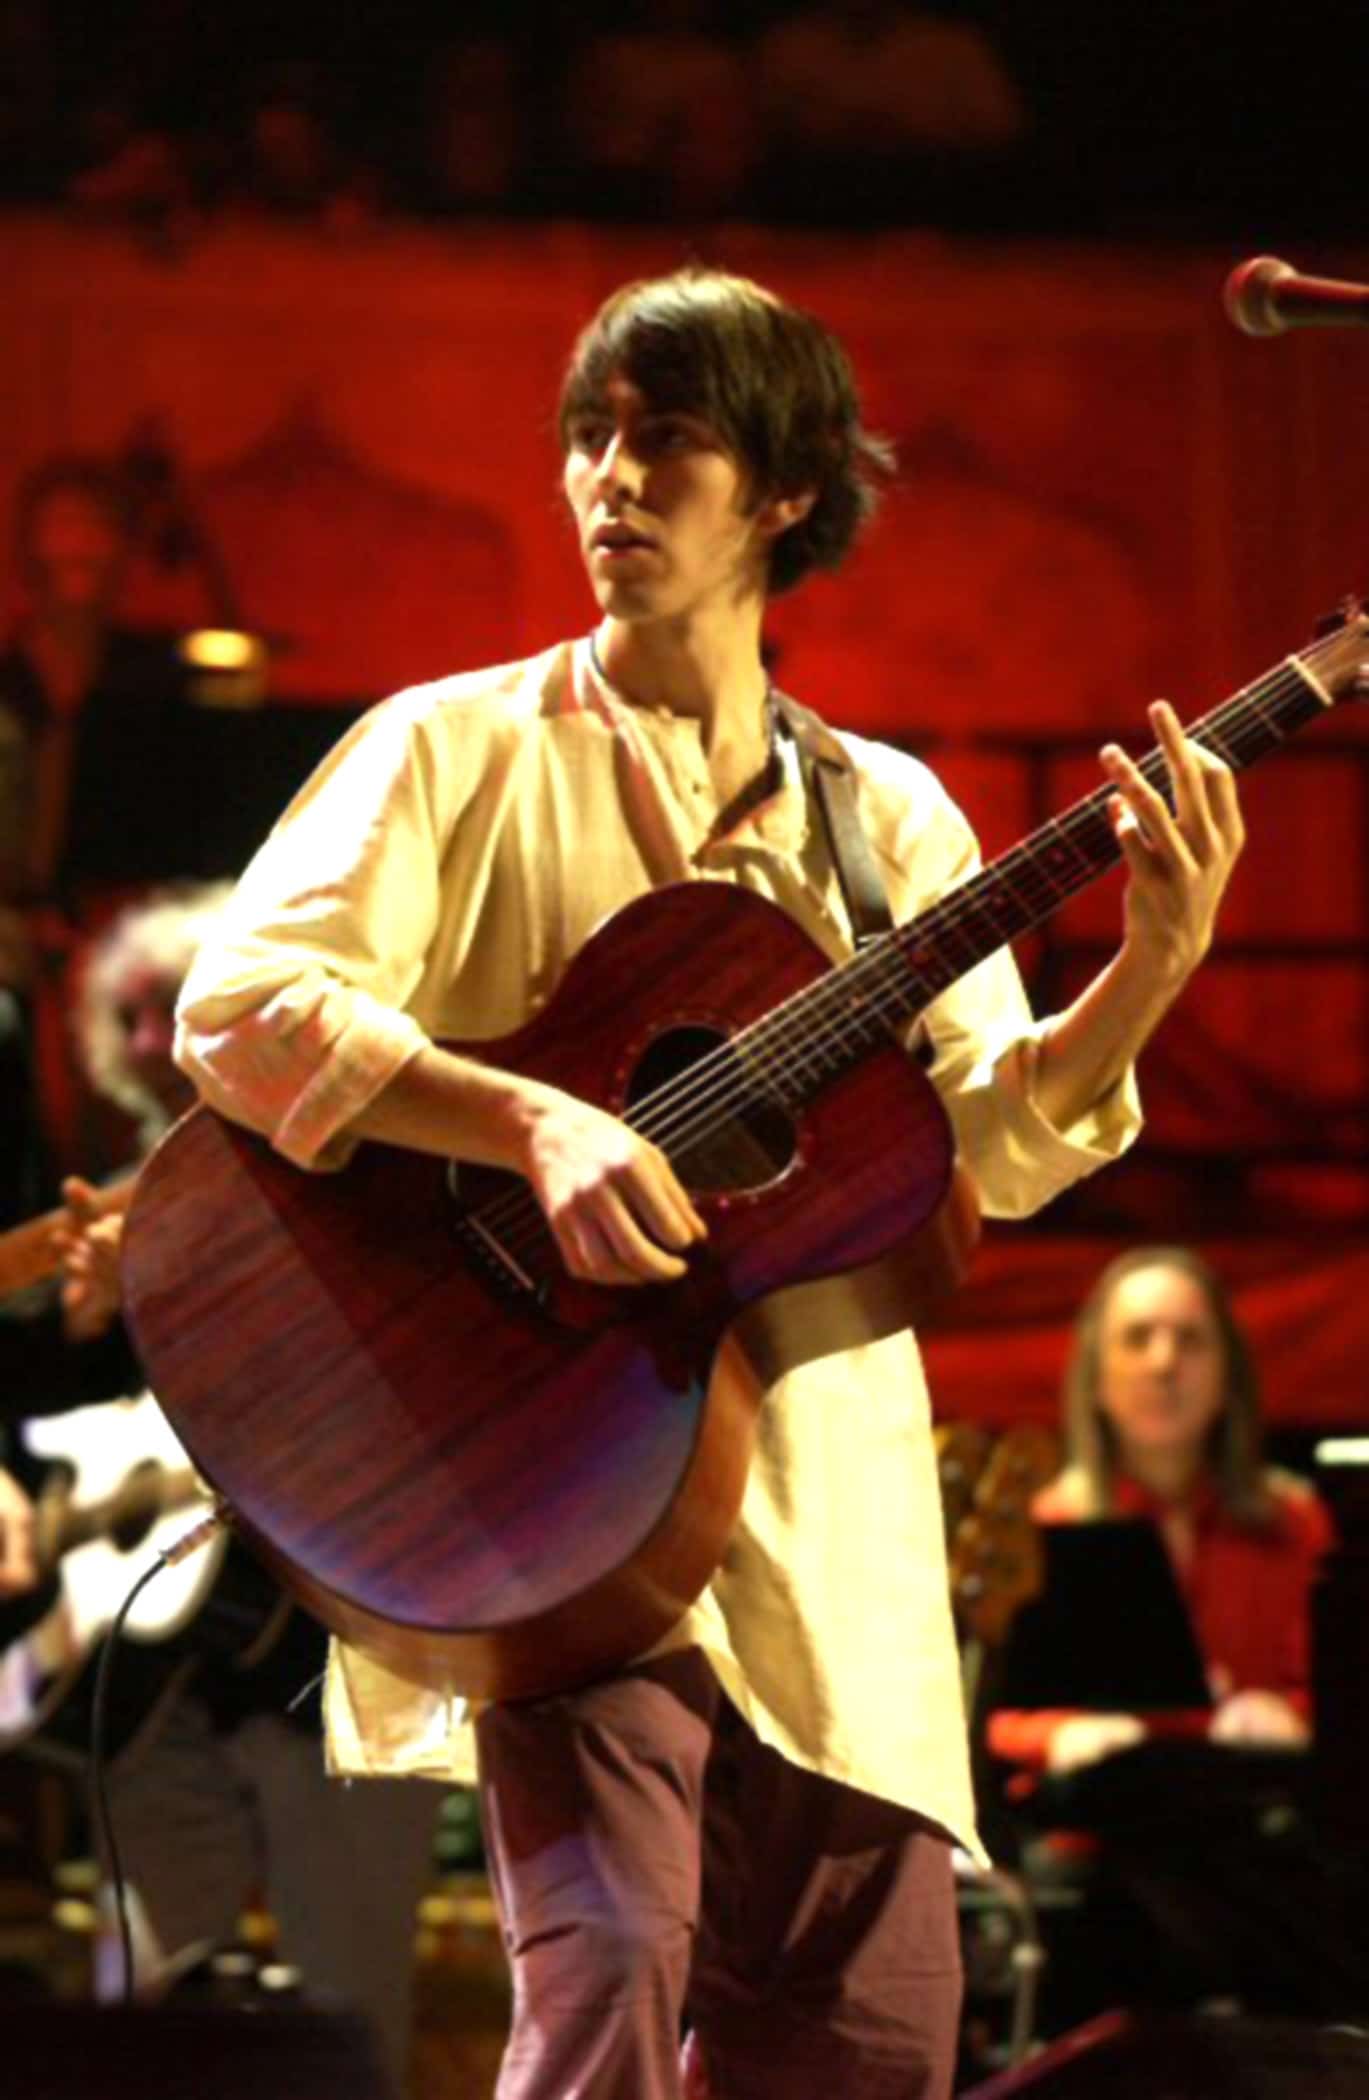 CONCERT FOR GEORGE, Dhani Harrison, 2003